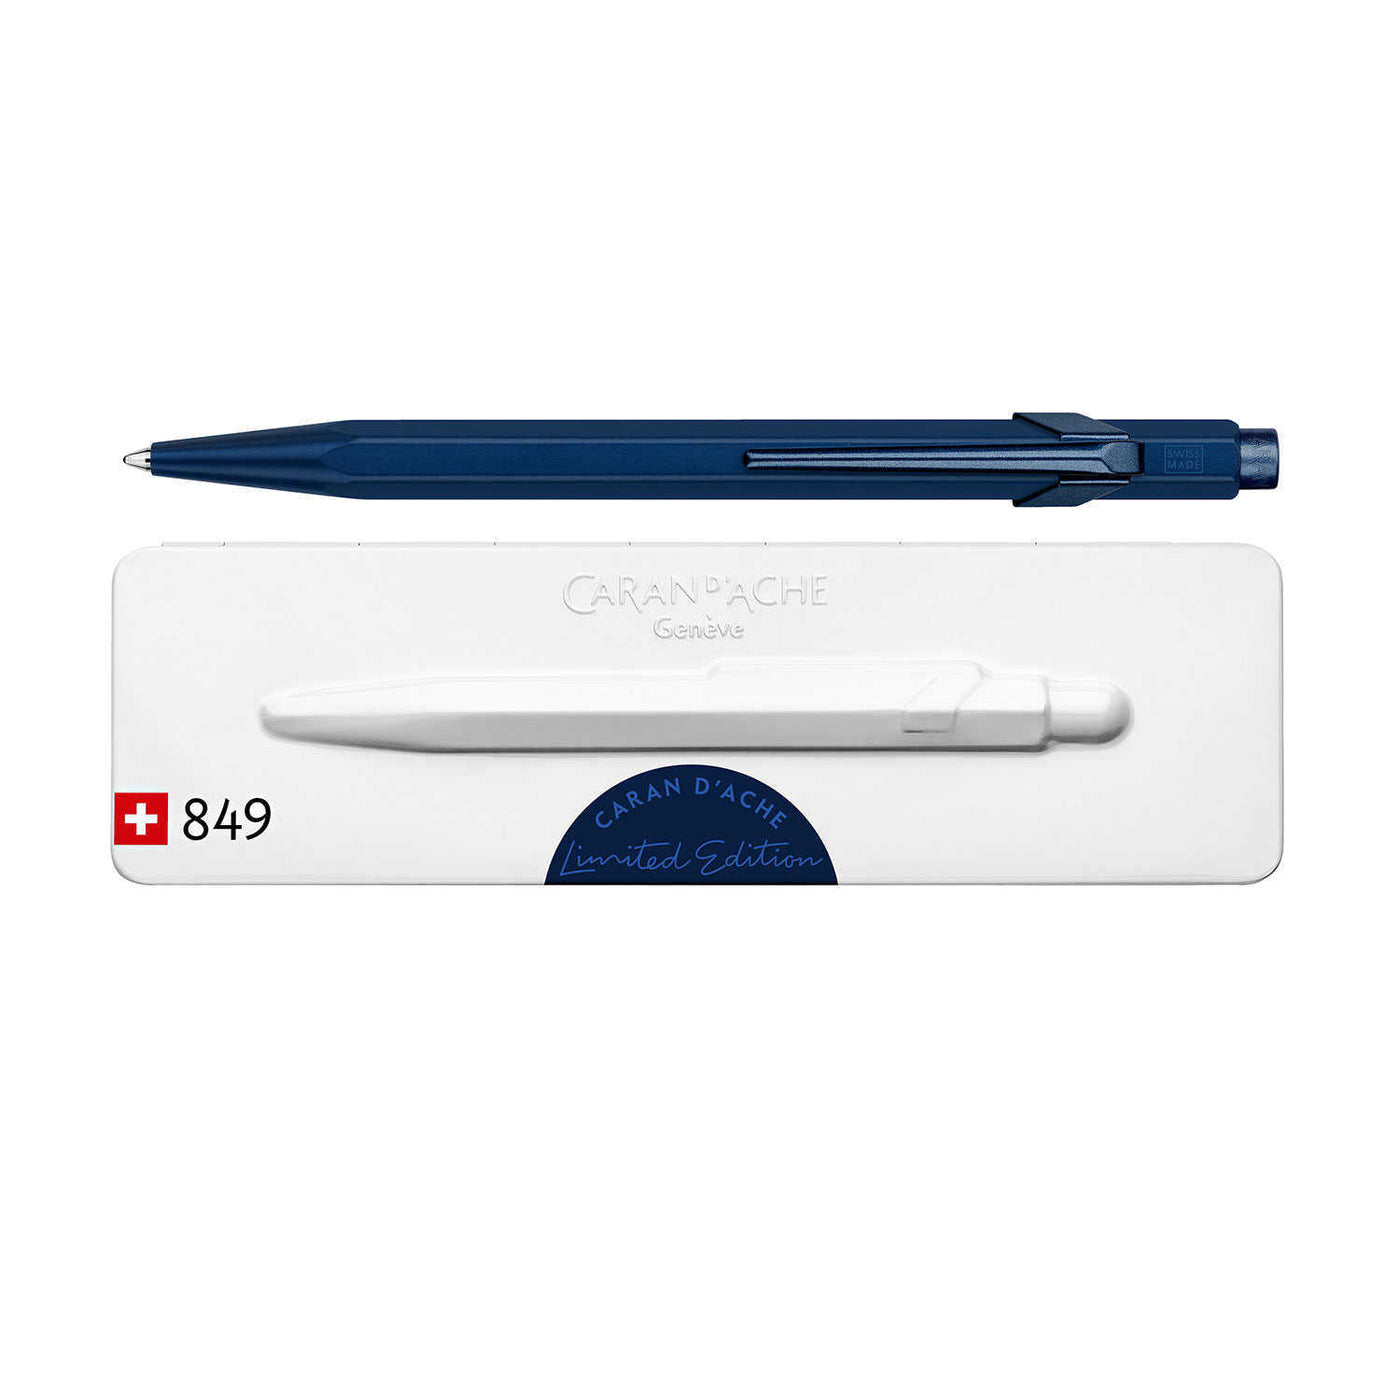 Caran d'Ache 849 Claim Your Style Ball Pen - Midnight Blue (Limited Edition) 2